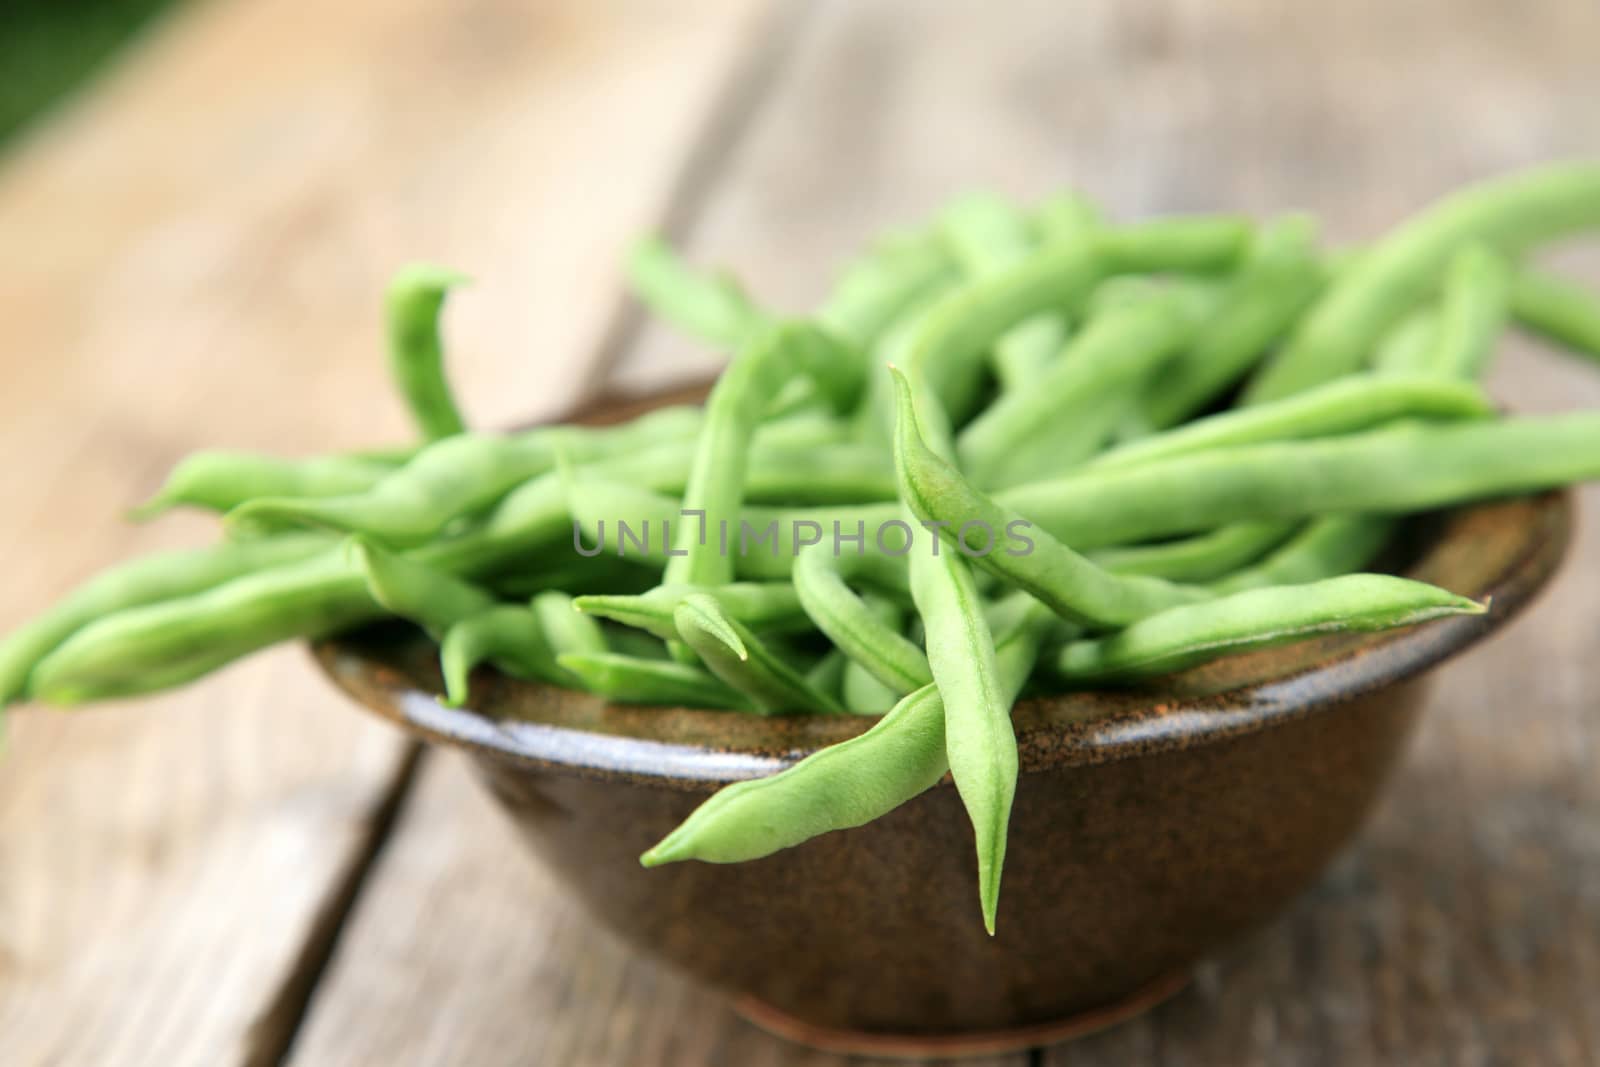 Many green beans in a brown bowl